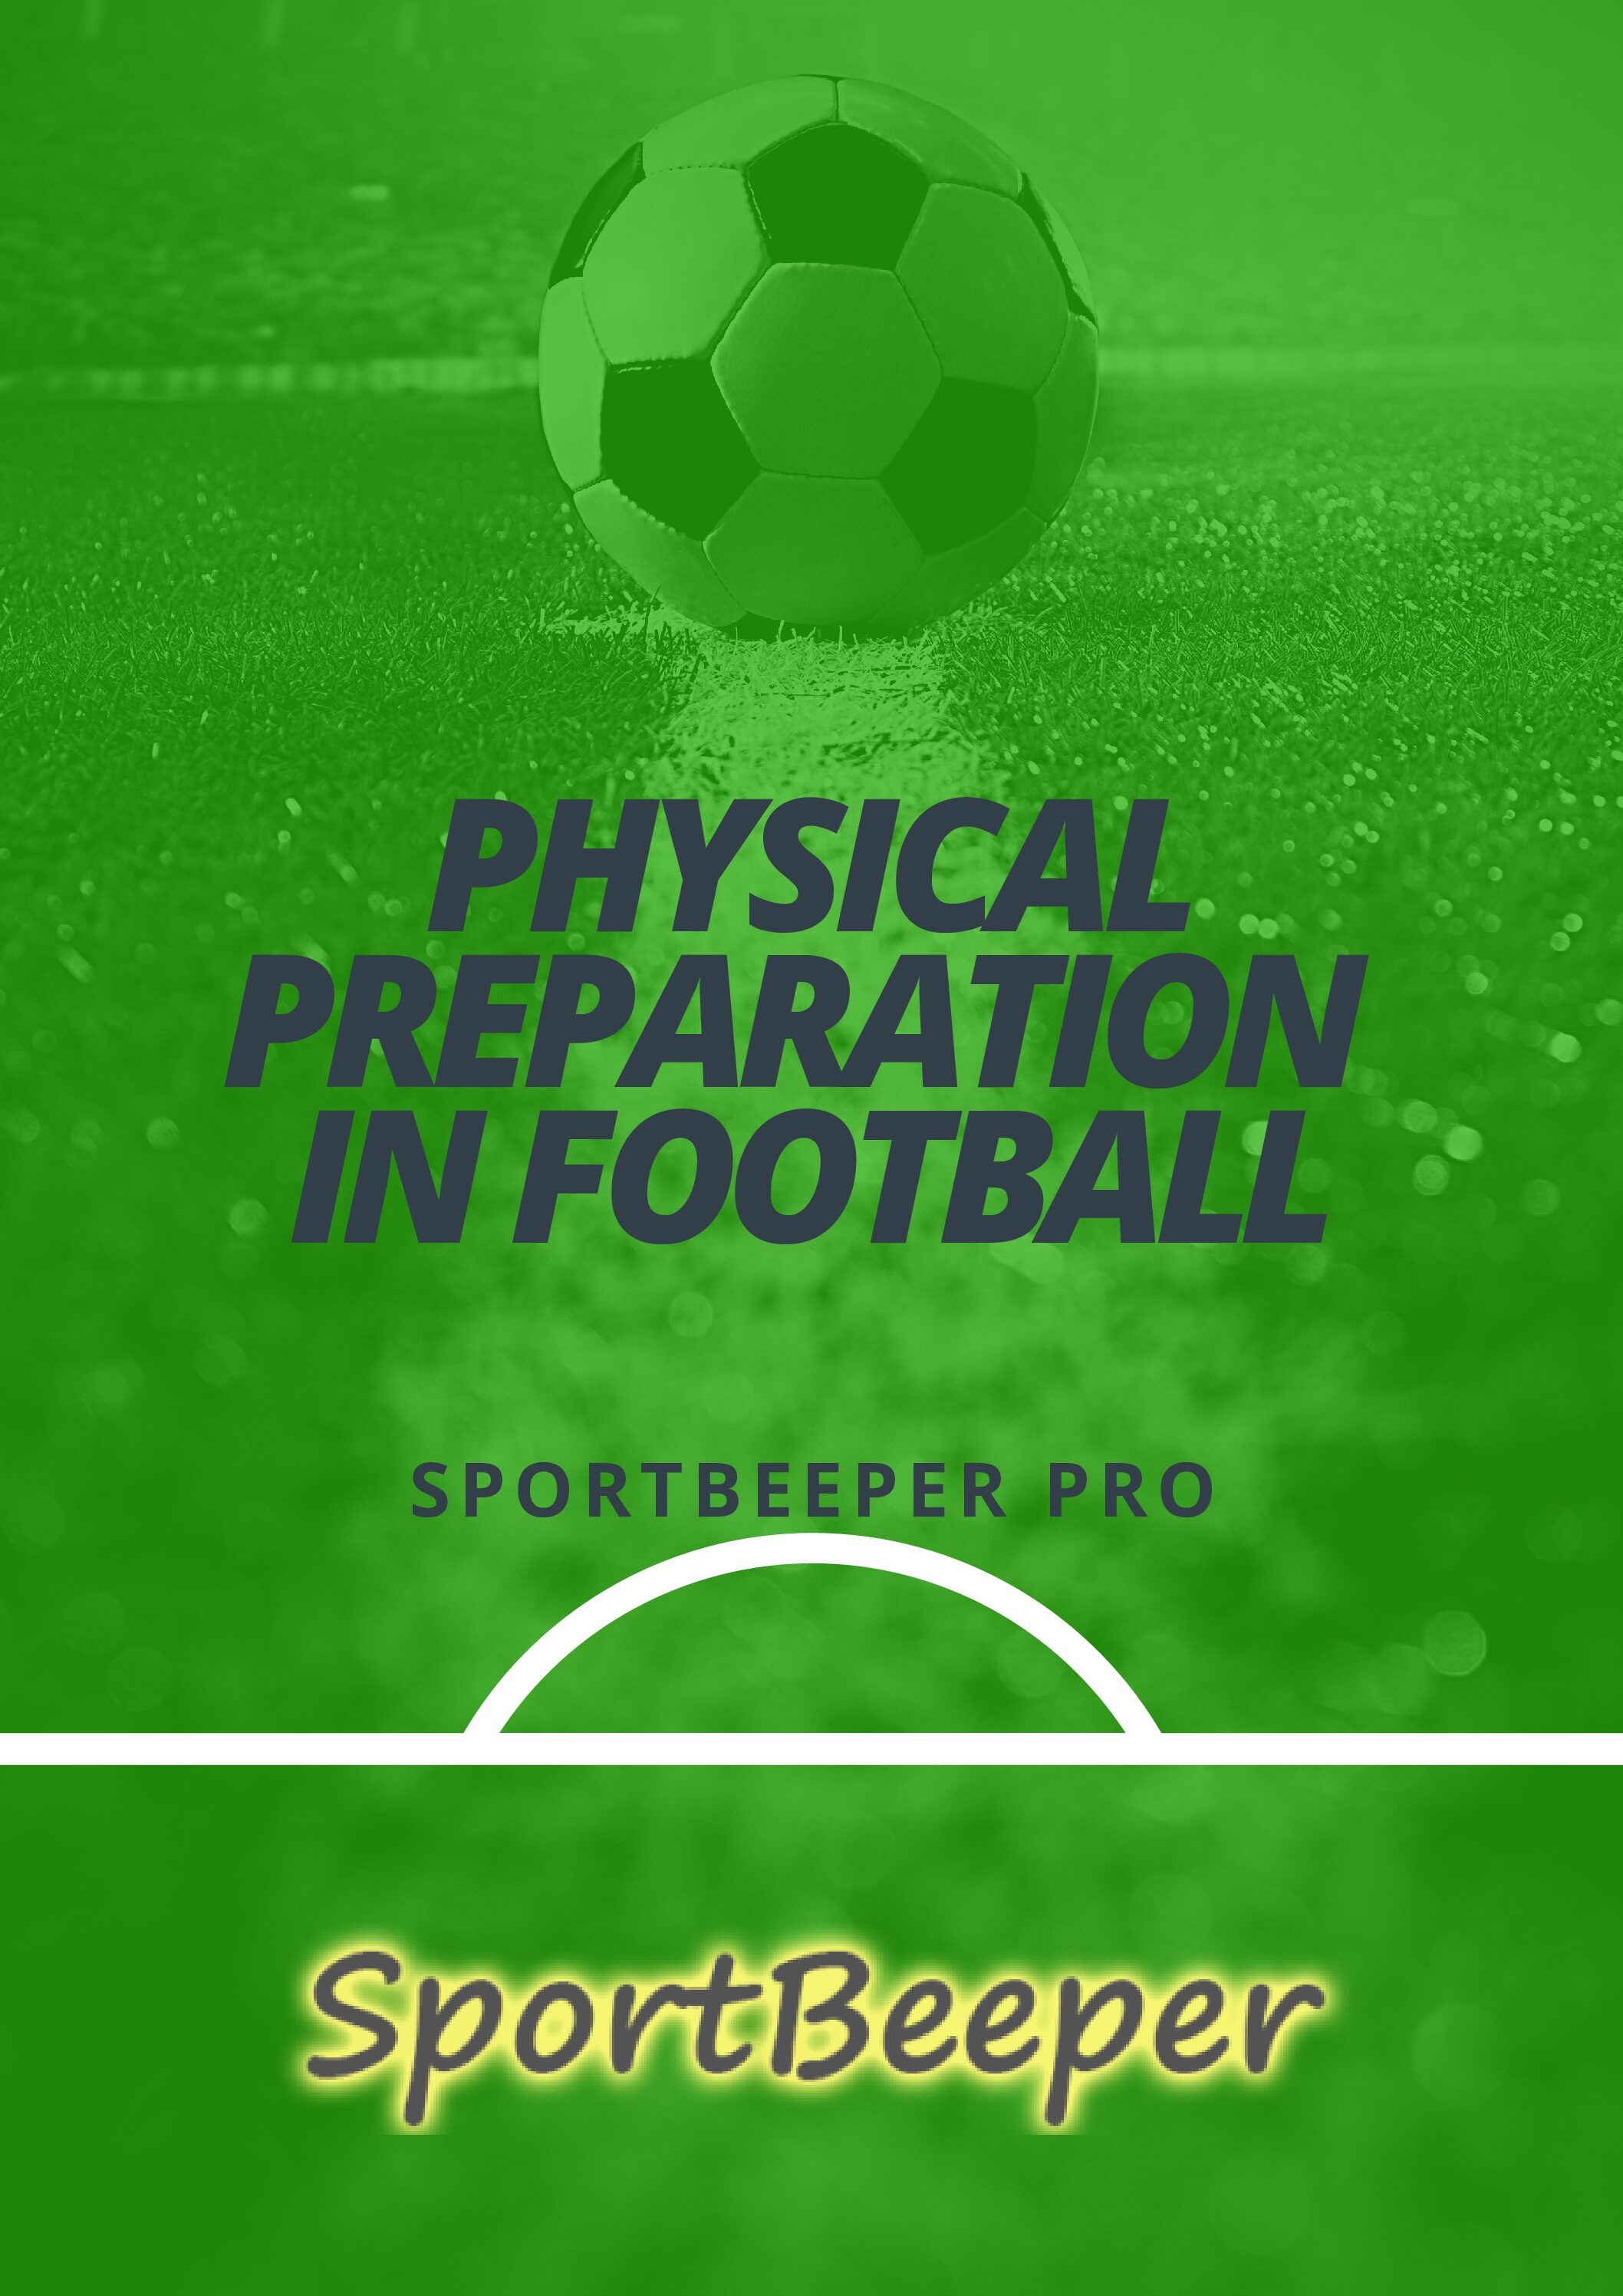 Physical Preparation in football